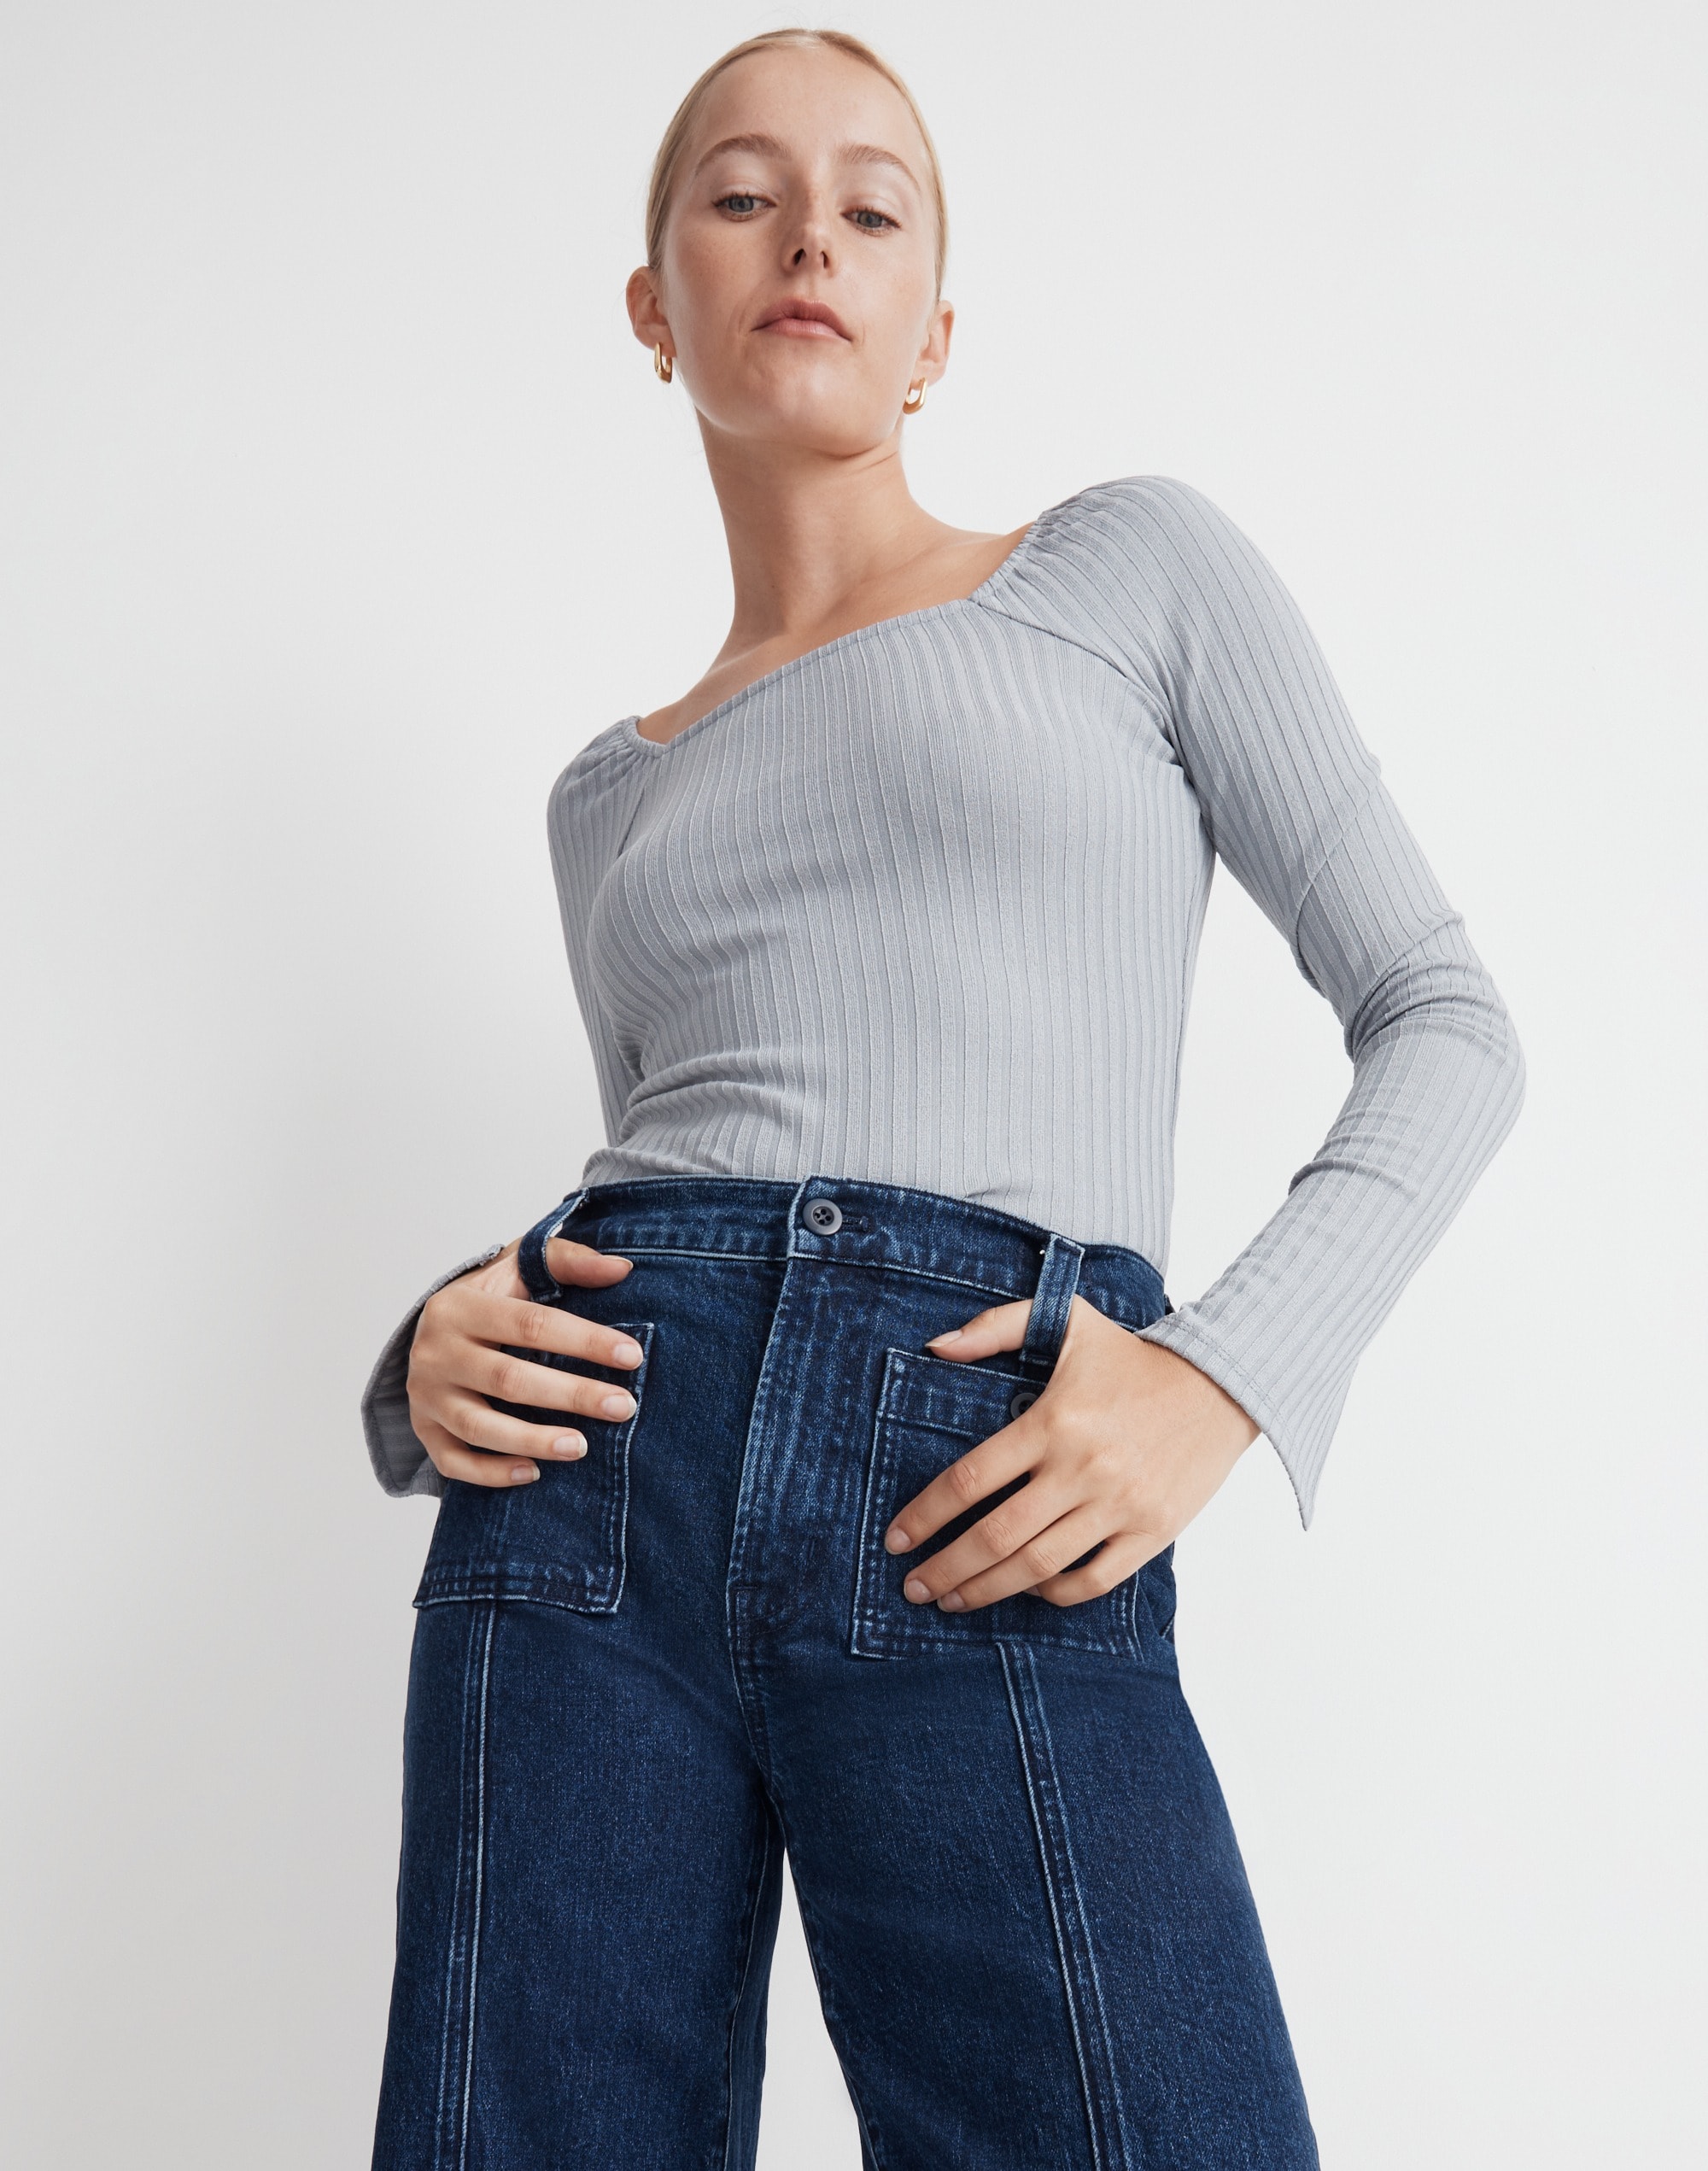 The Perfect Vintage Wide-Leg Jean Norden Wash: Patch-Pocket Edition